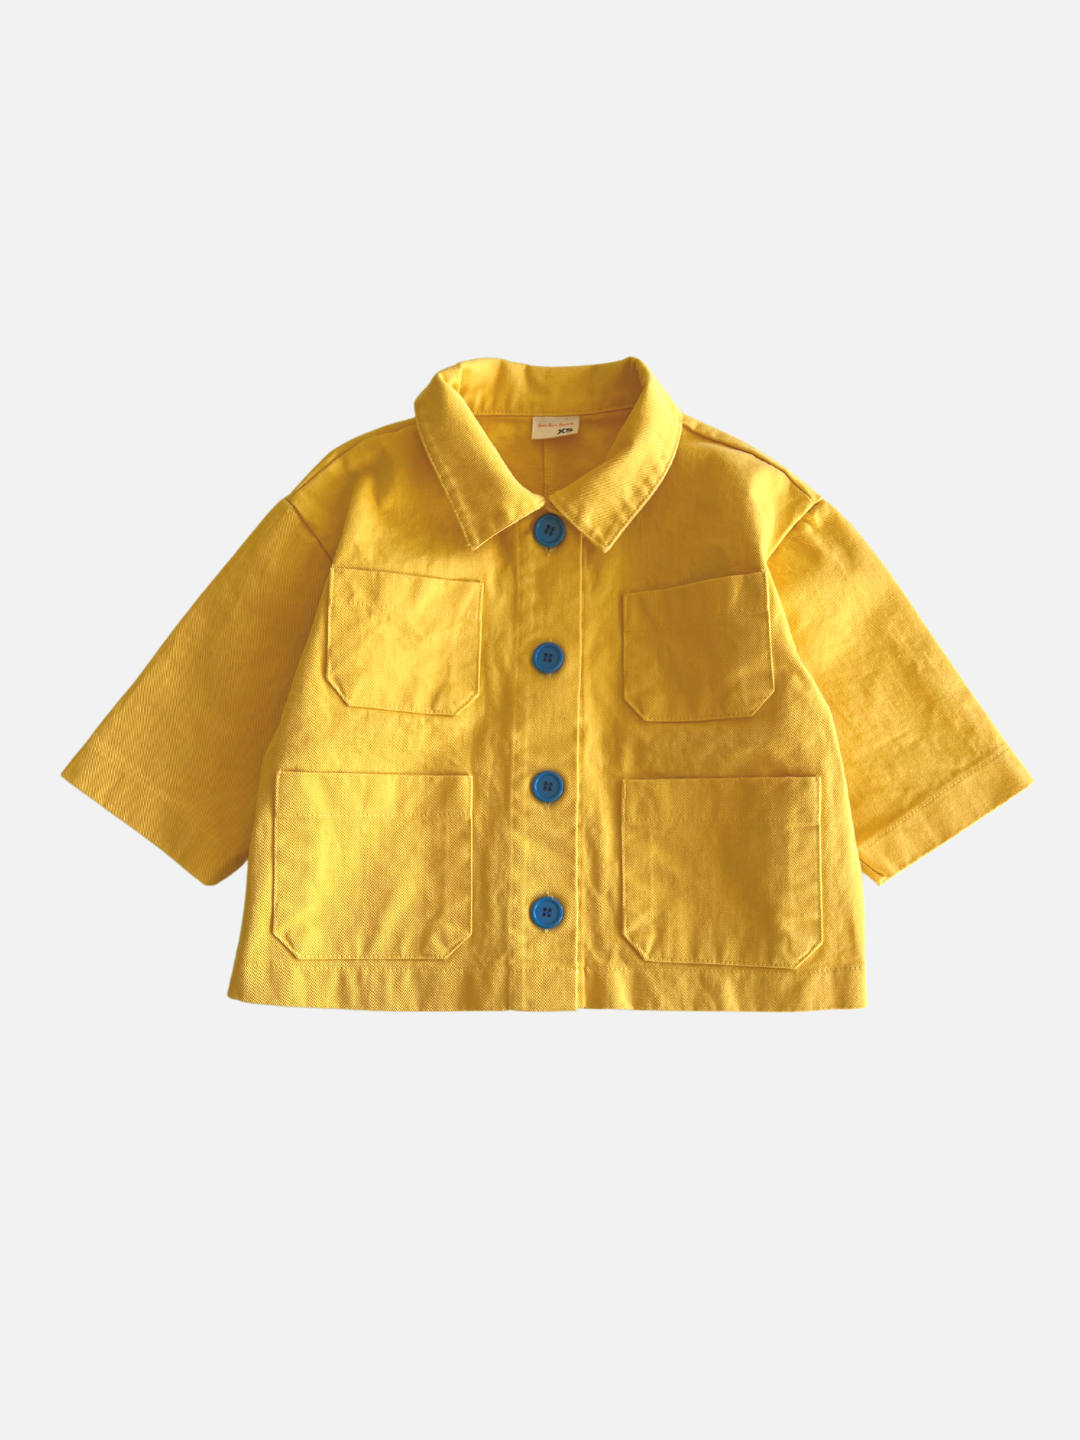 Yellow | A kids' jacket in yellow, with four pockets and four blue buttons